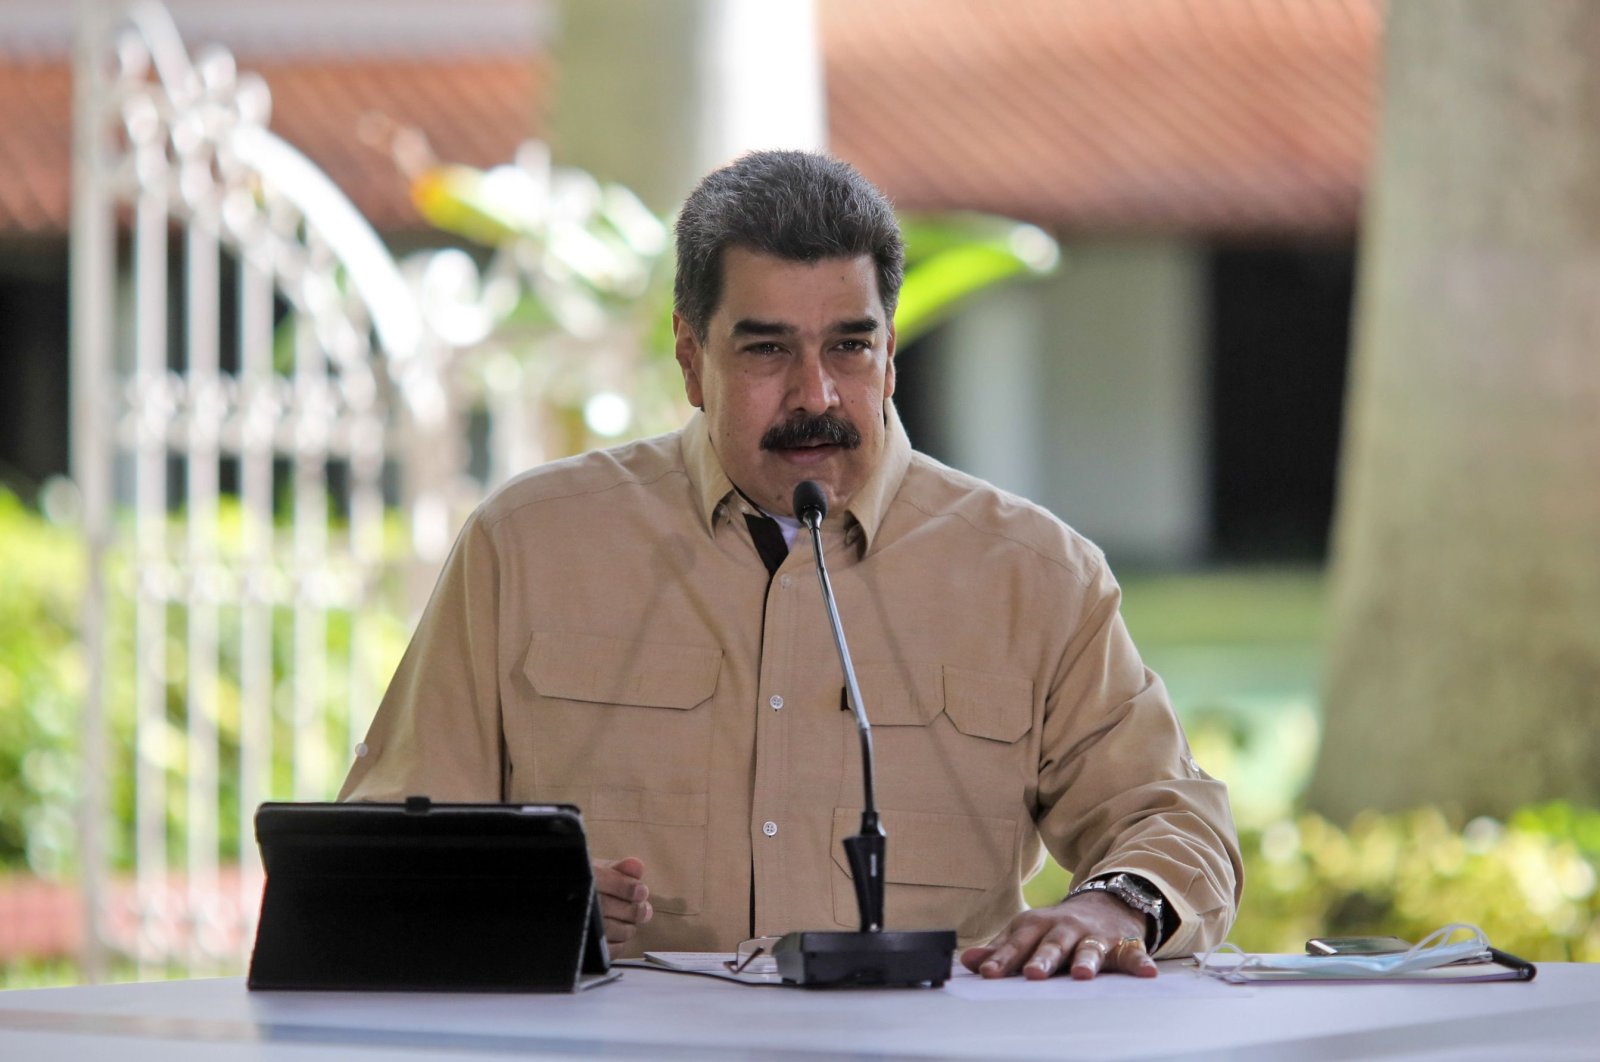 This handout picture released by the Venezuelan presidency shows Venezuela's President Nicolas Maduro speaking during a televised announcement from Miraflores Presidential Palace in Caracas, Venezuela, Sept. 6, 2020. (Venezuelan Presidency Photo via AFP)